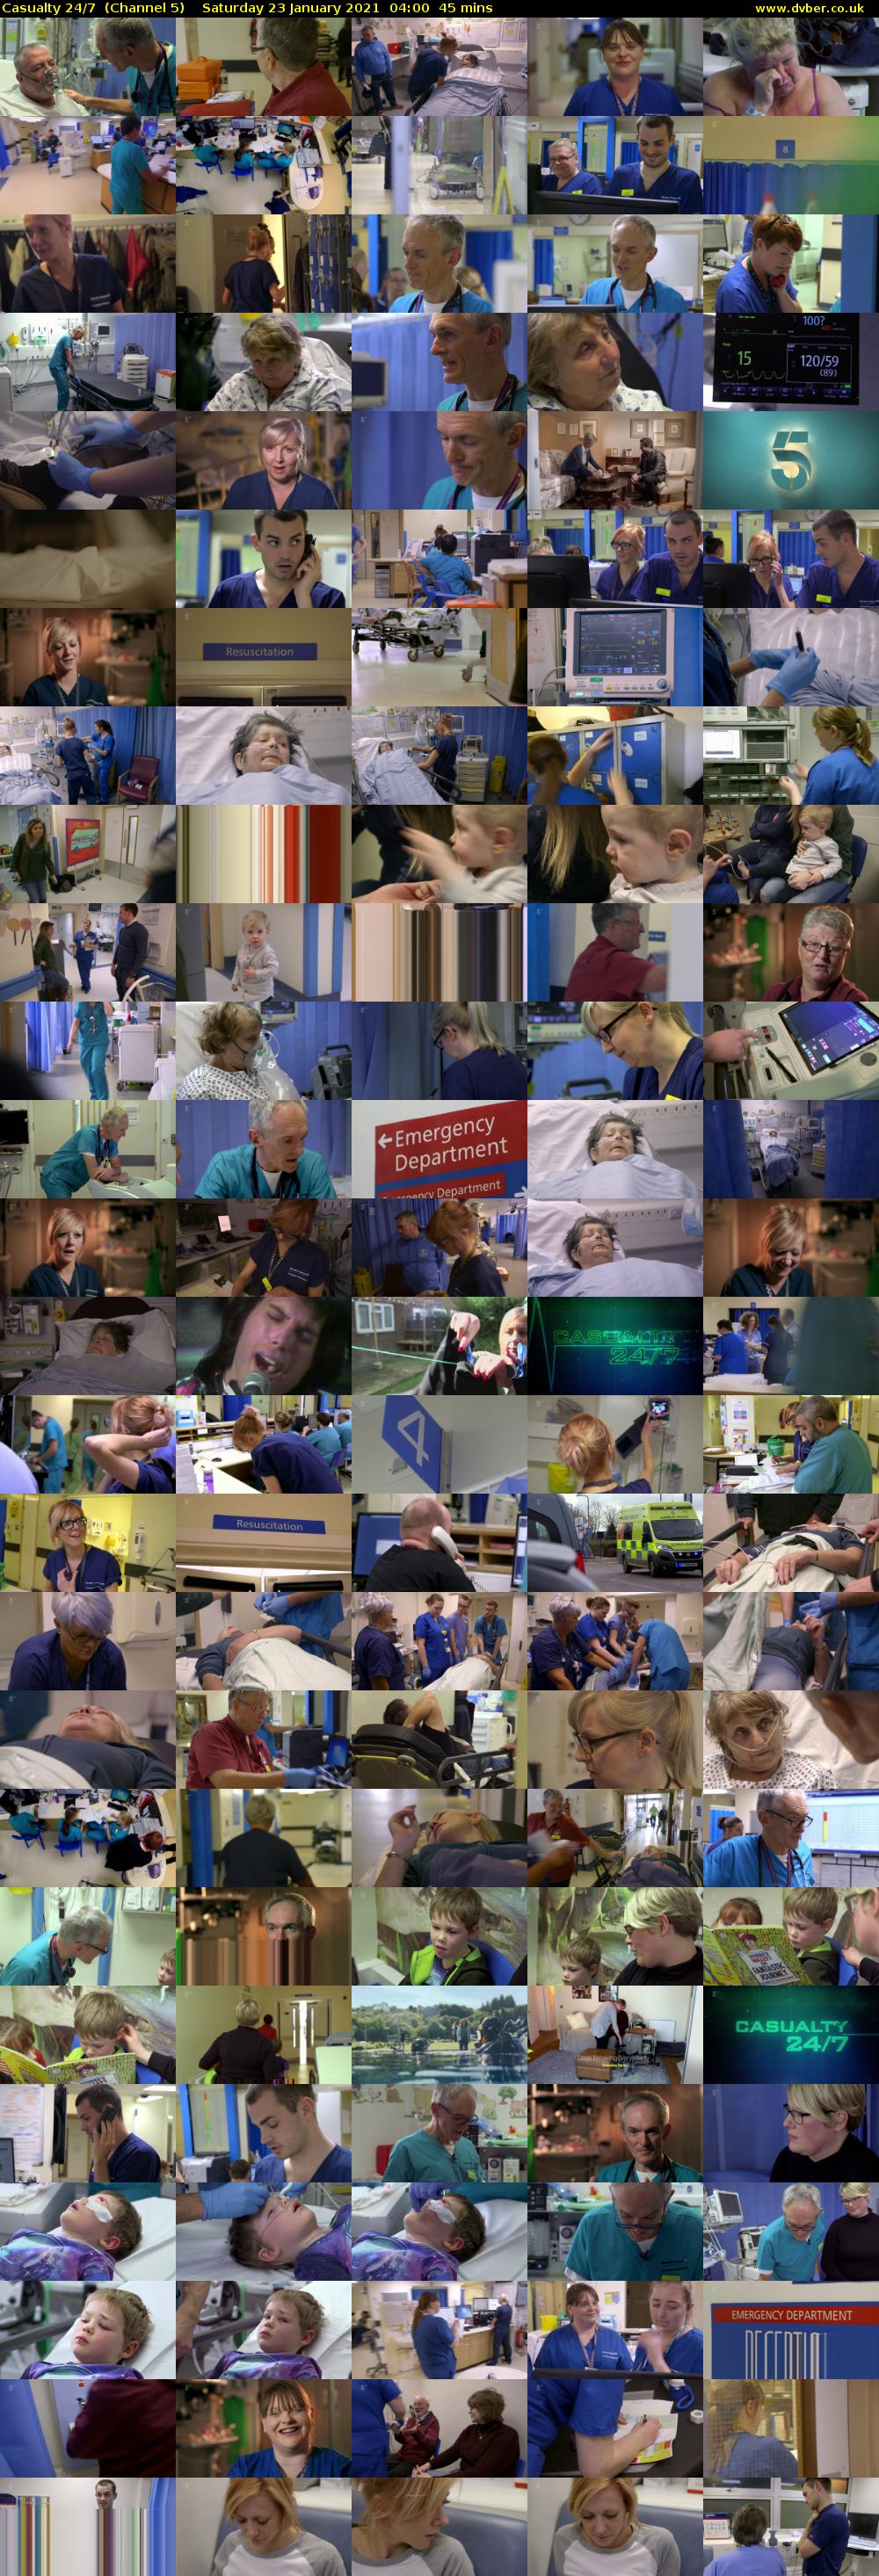 Casualty 24/7  (Channel 5) Saturday 23 January 2021 04:00 - 04:45